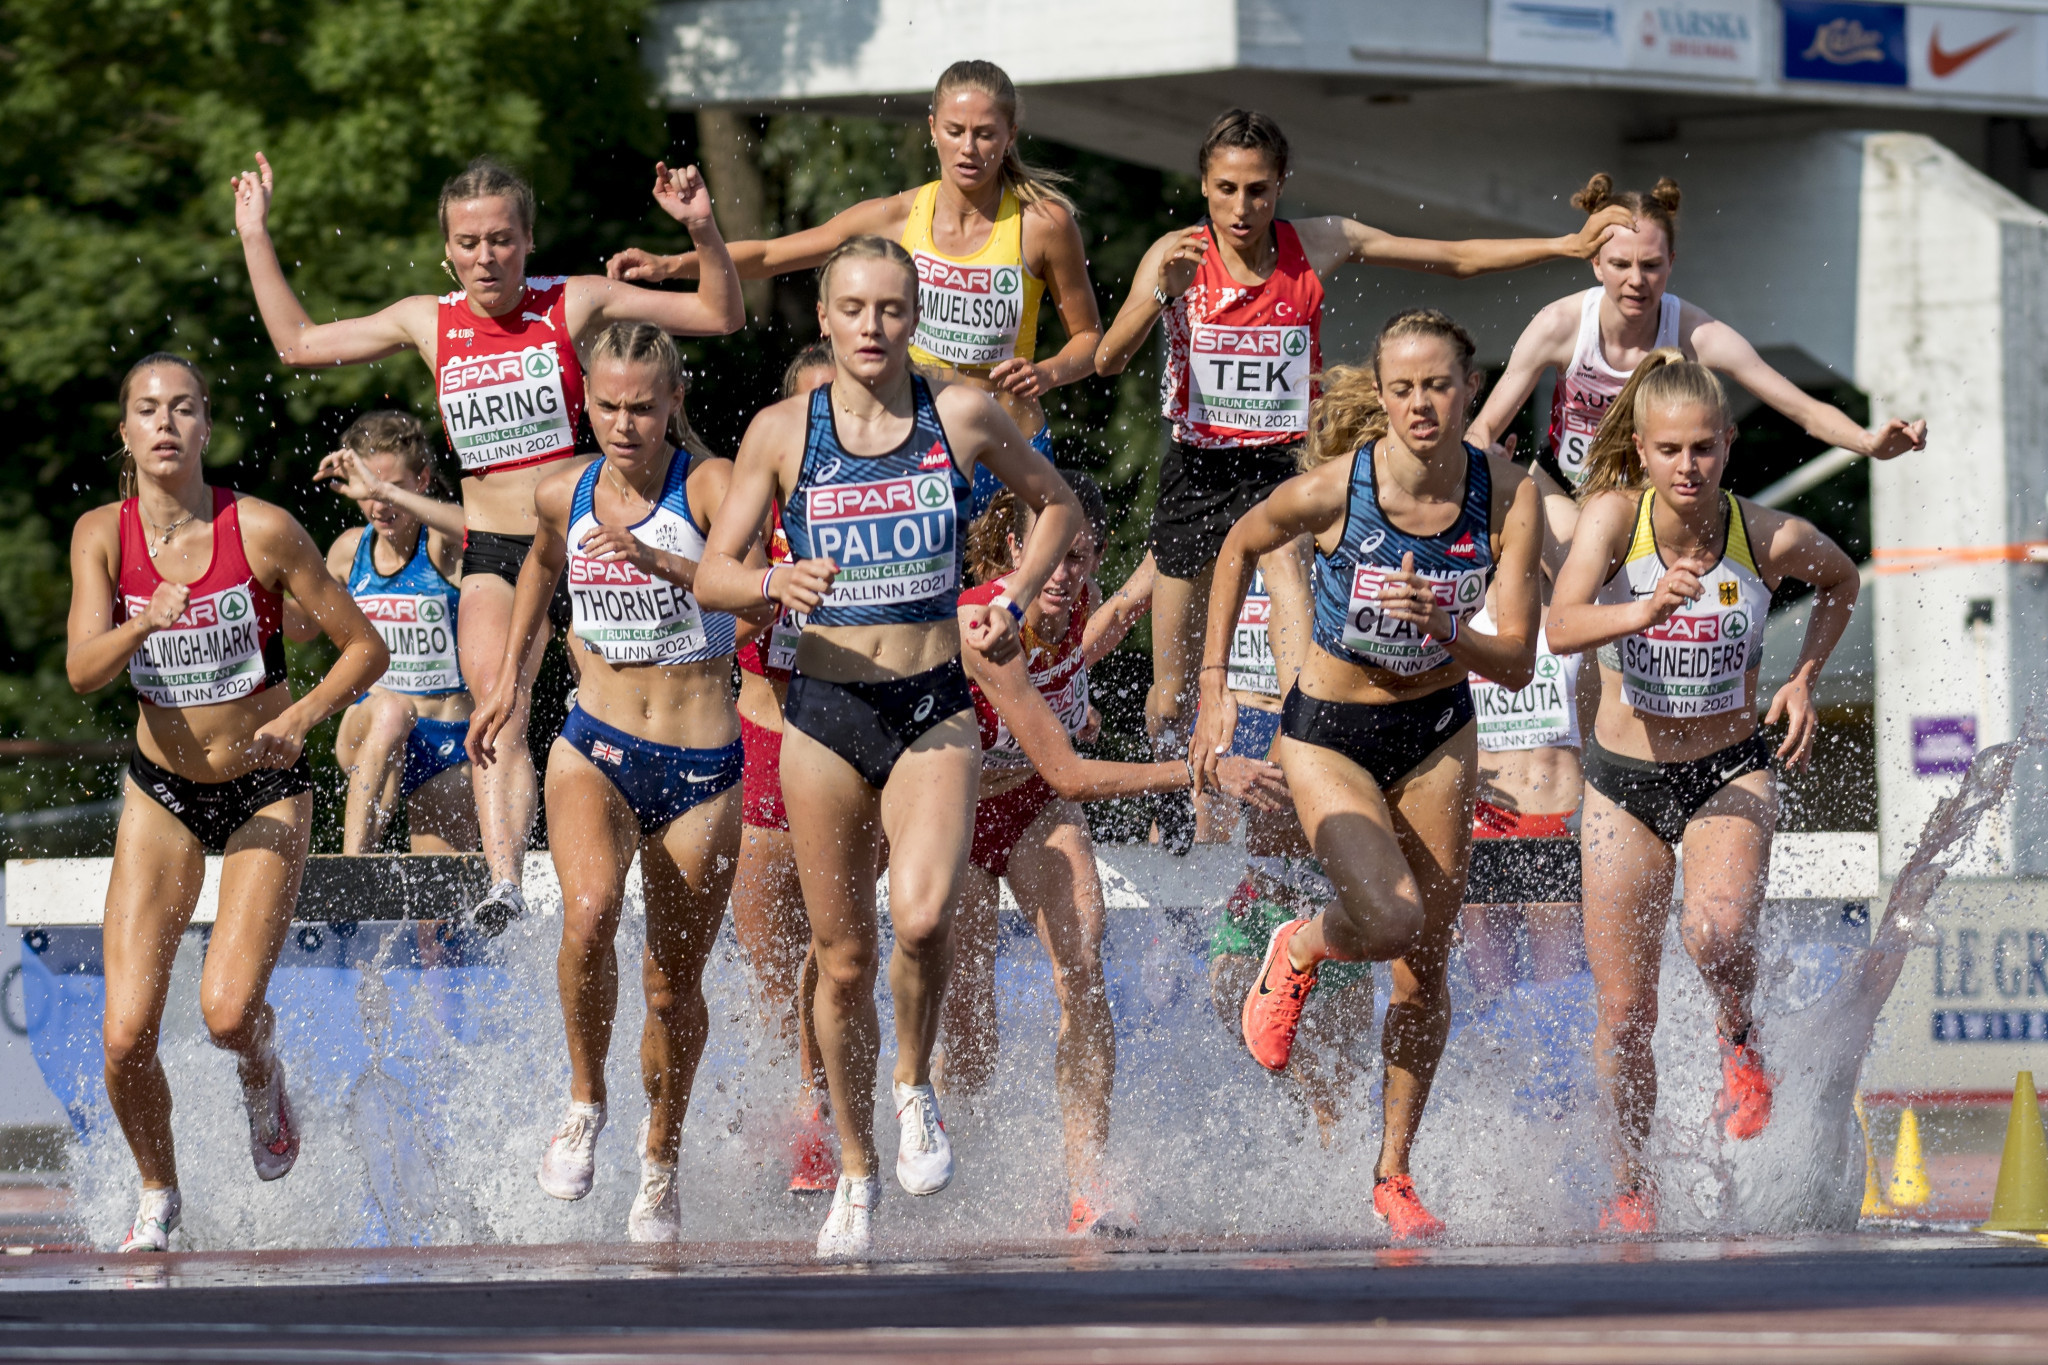 French steeplechase athlete Claire Palou, centre, has called for the 